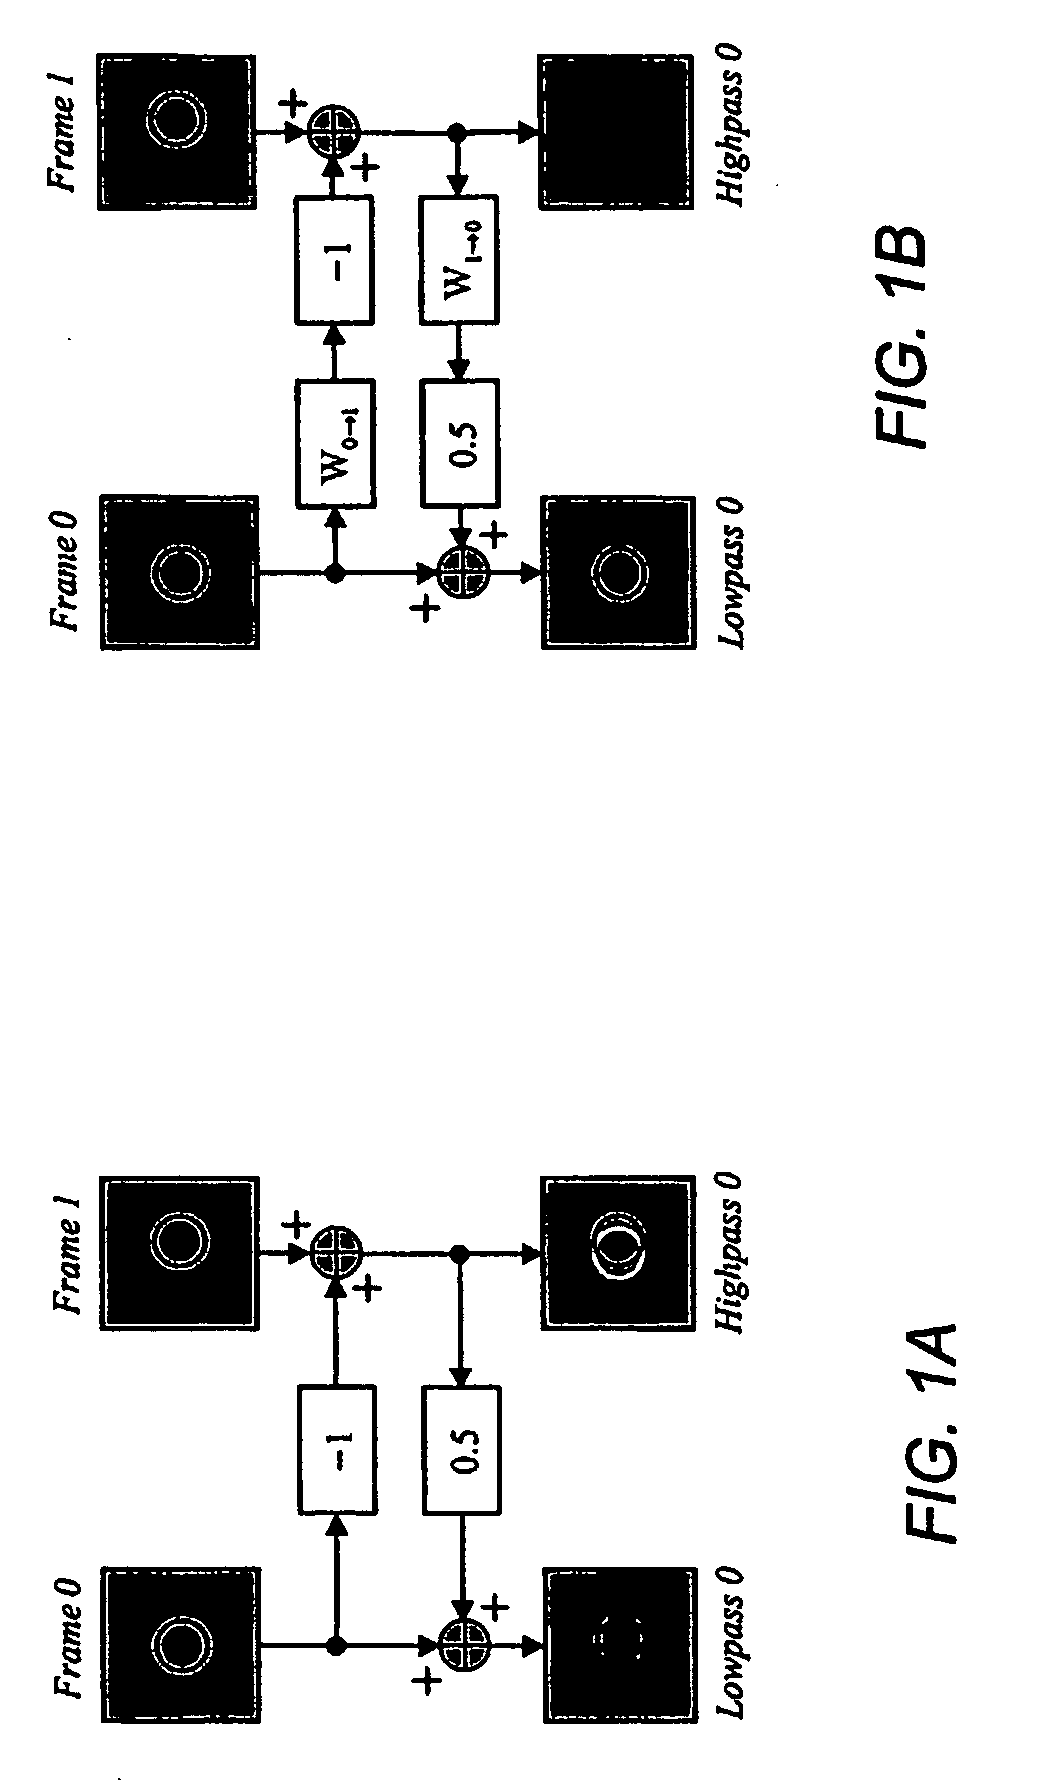 Method of signalling motion information for efficient scalable video compression